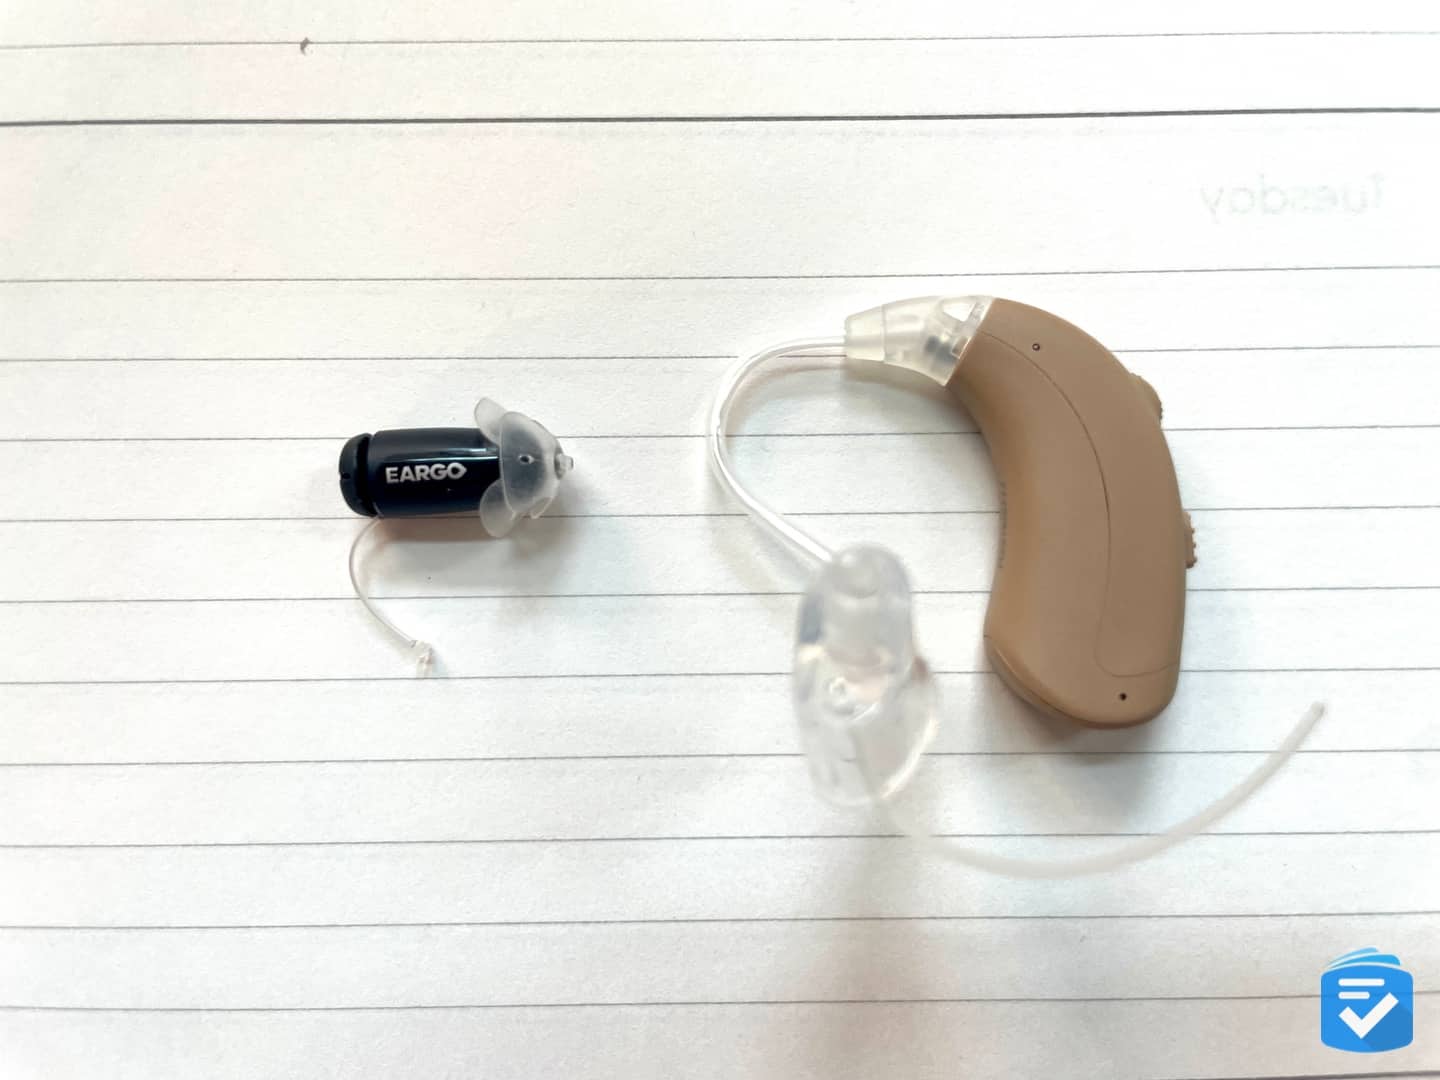 MDHearing Volt hearing aids are significantly larger than Eargo hearing aids.